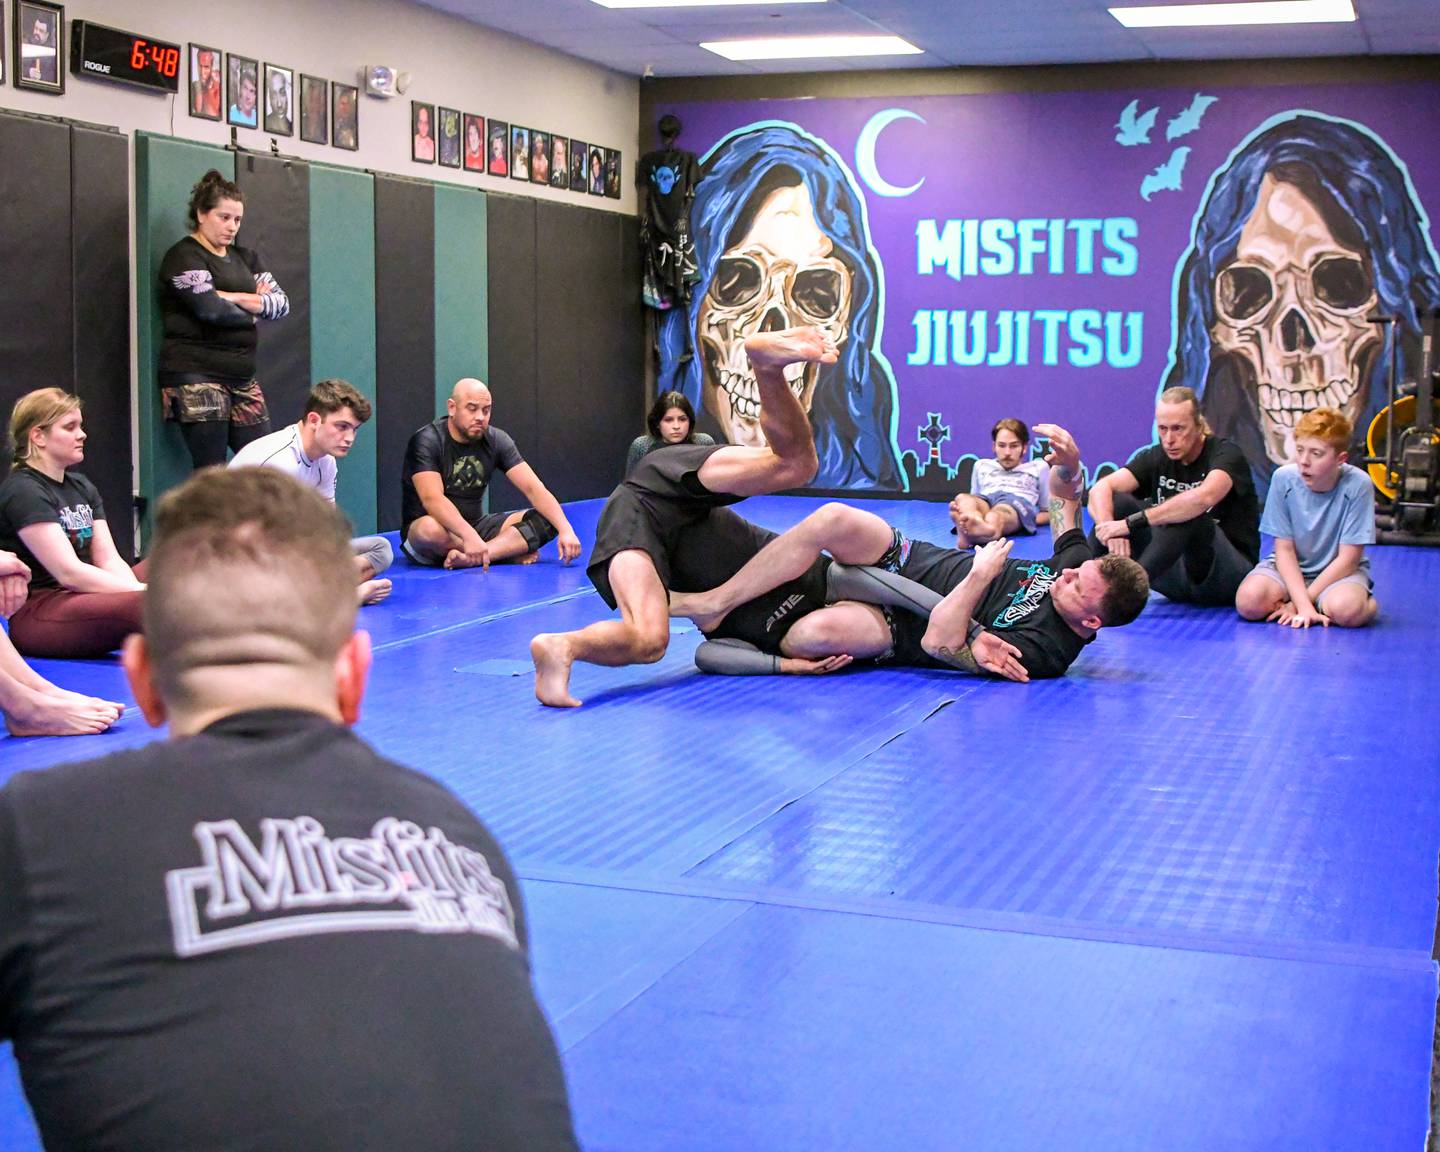 Owner of the Jiujitsu company called Misfits located in St. Charles Brad Edmondson, right, shows how to perform a move during class on Wednesday March 3, 2024.